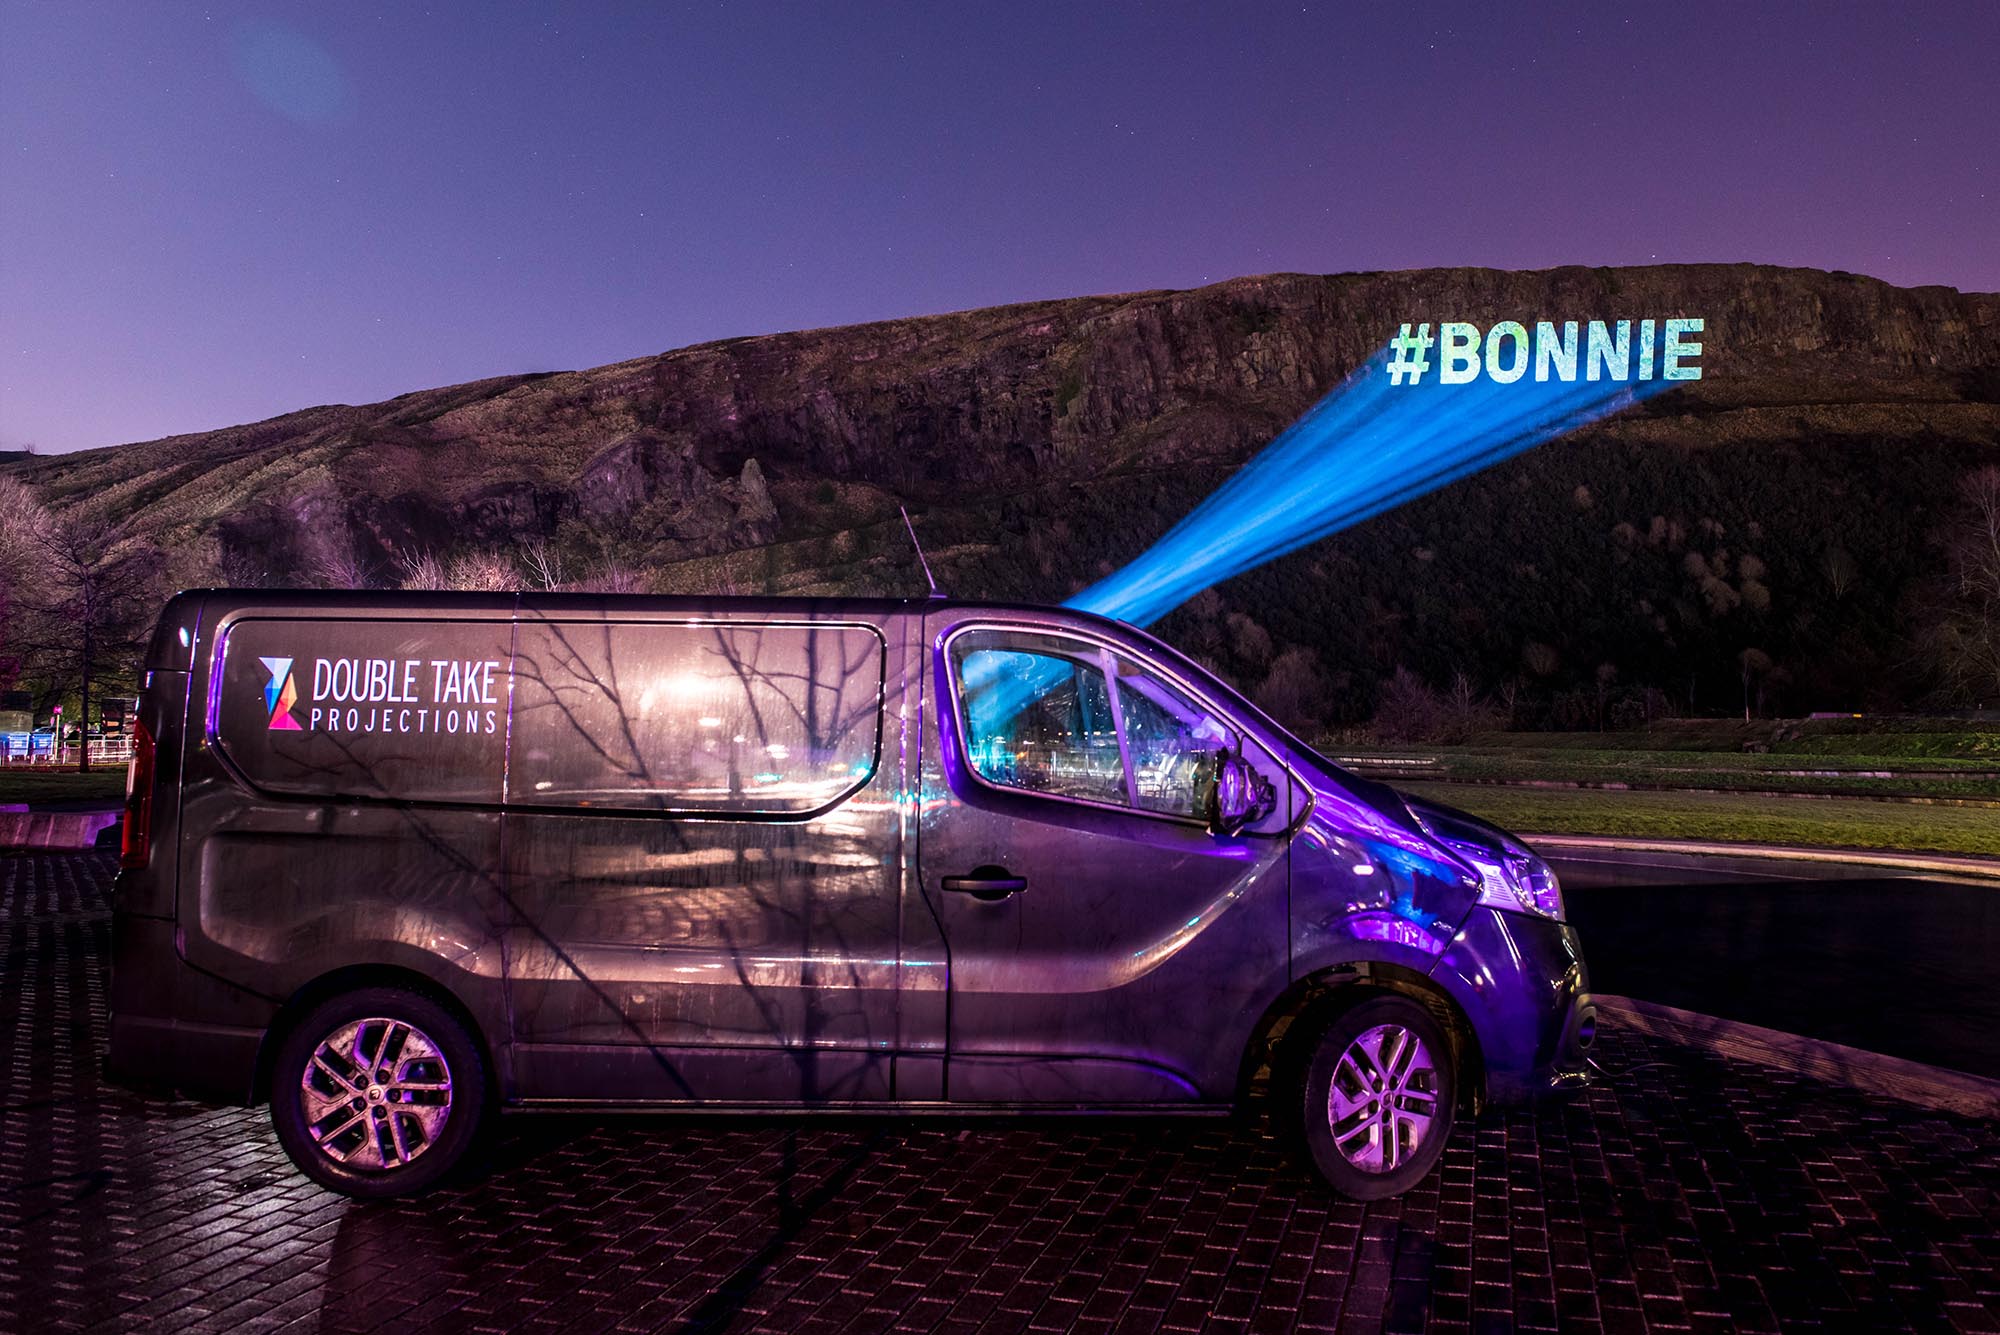 Torchlight Procession Projections, #bonnie beamed on Edinburgh Crags